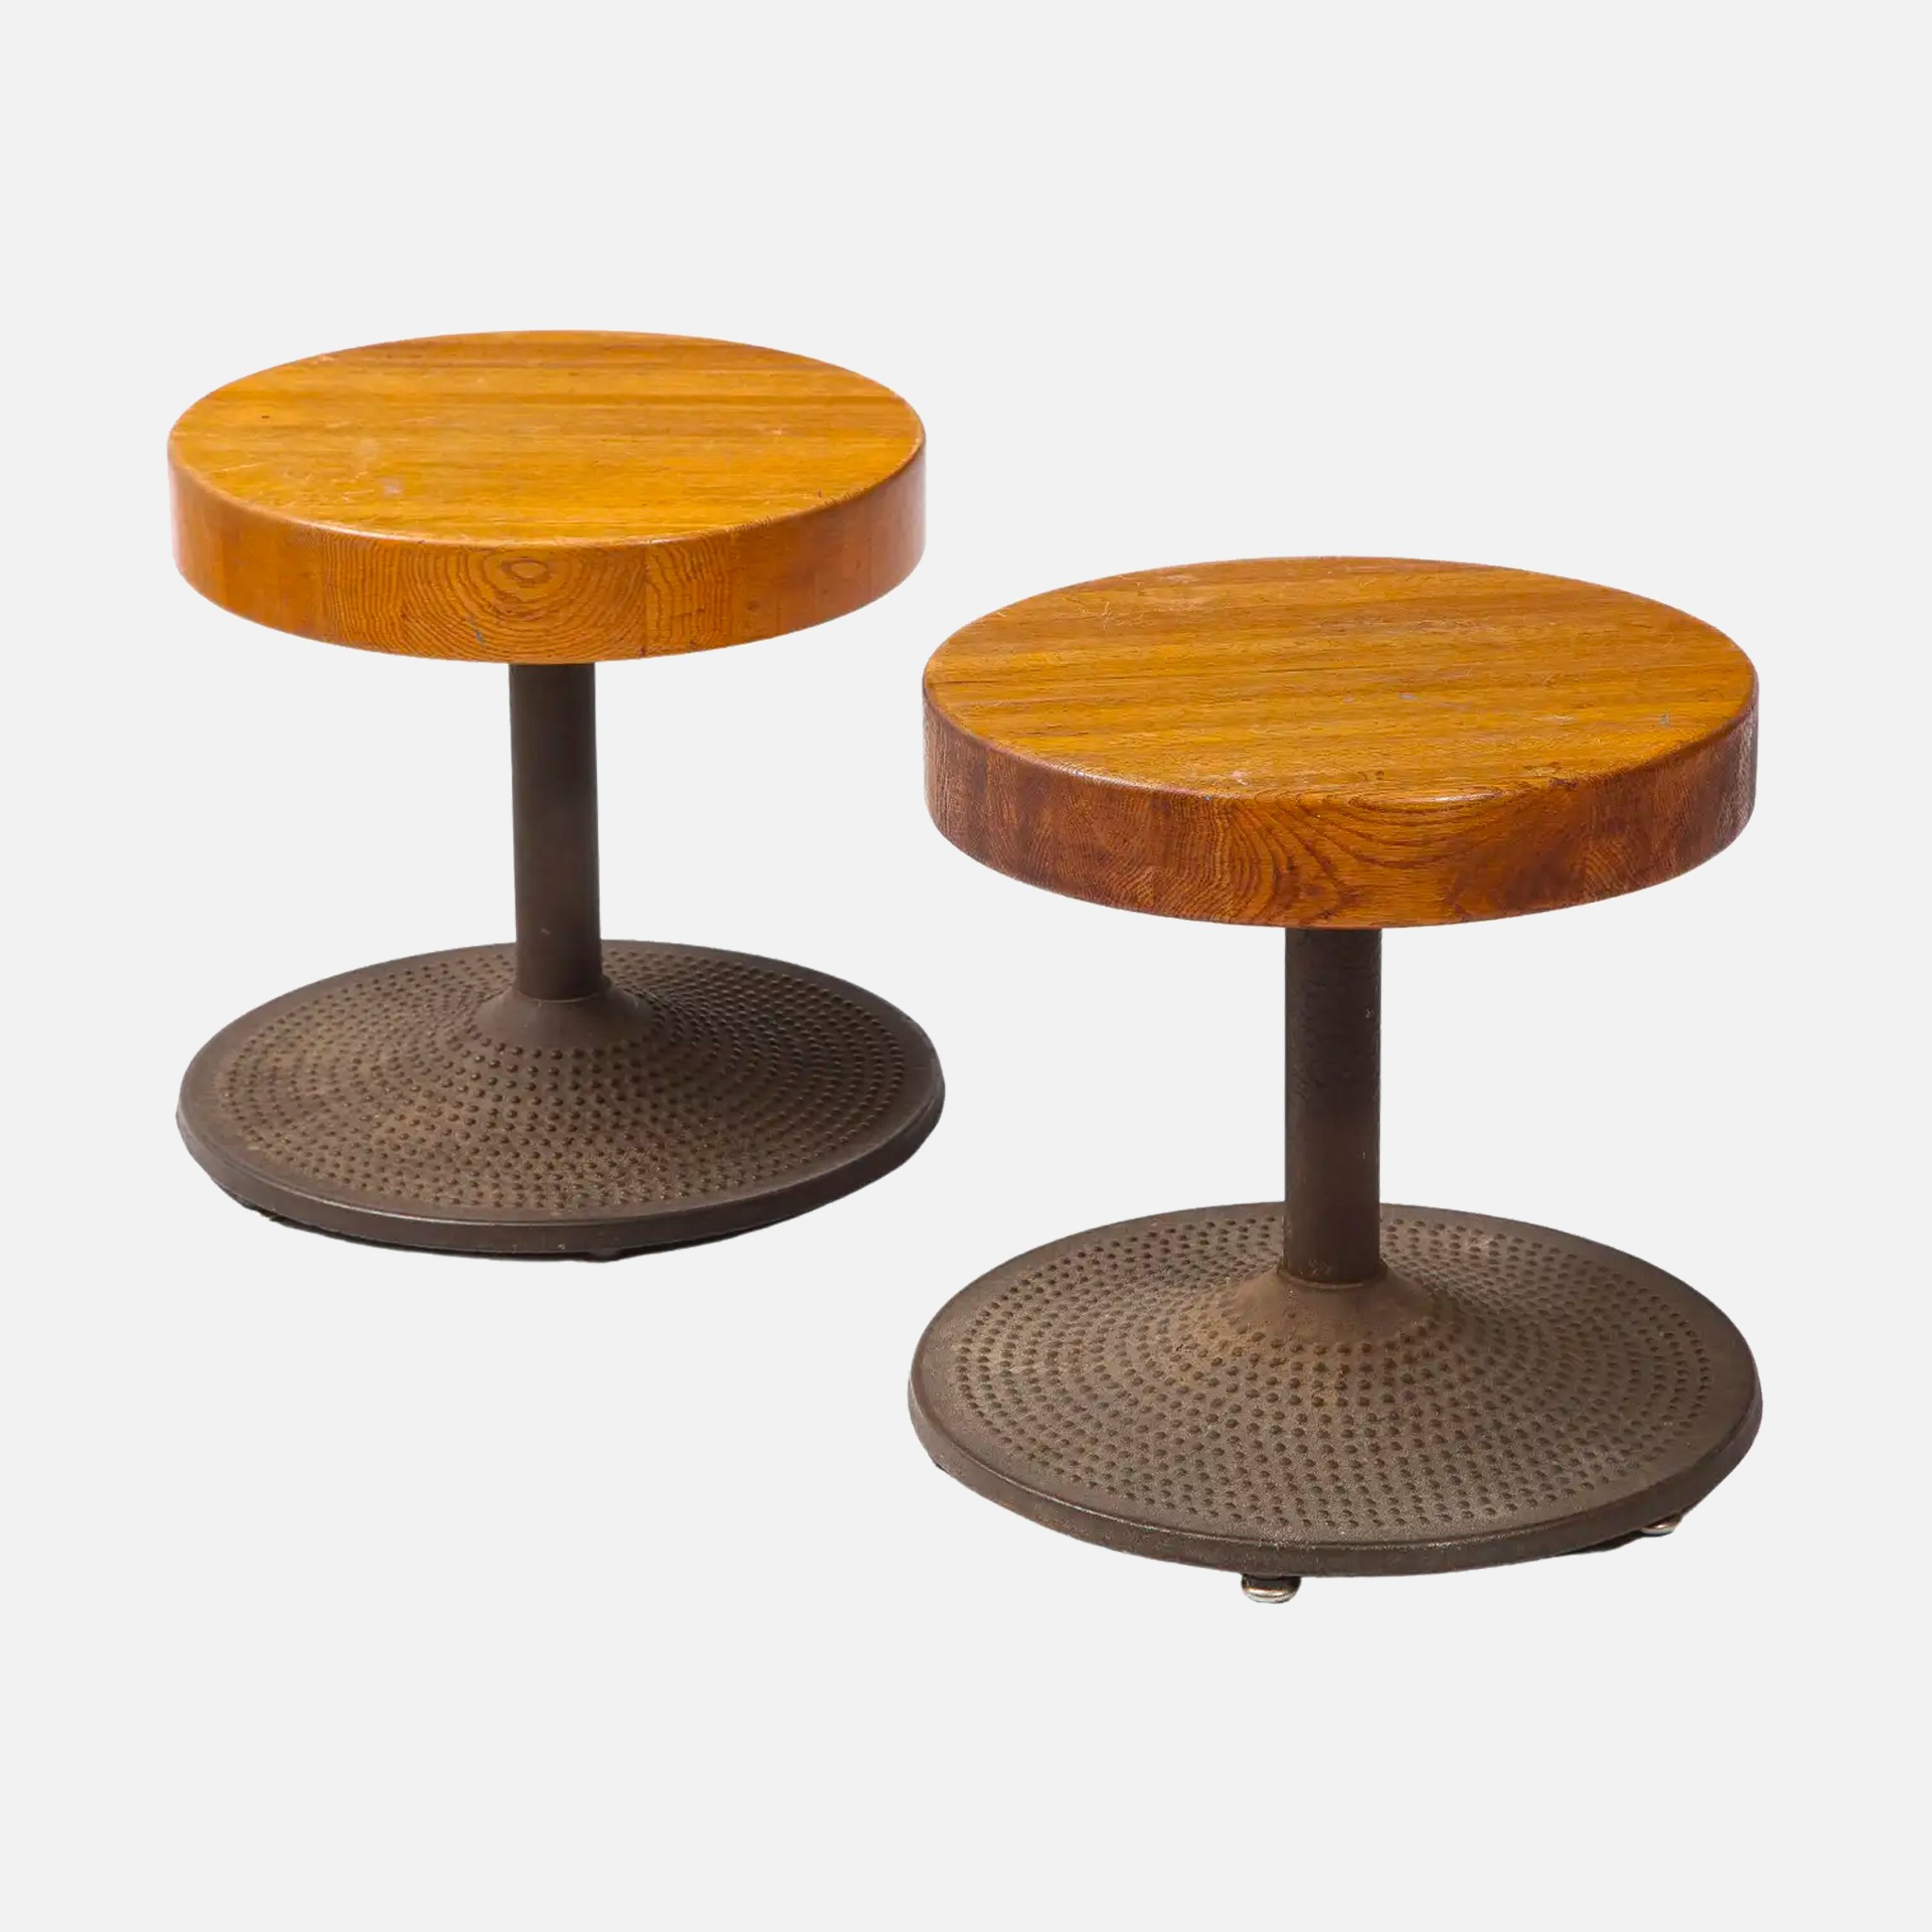 a pair of wooden tables sitting on top of each other